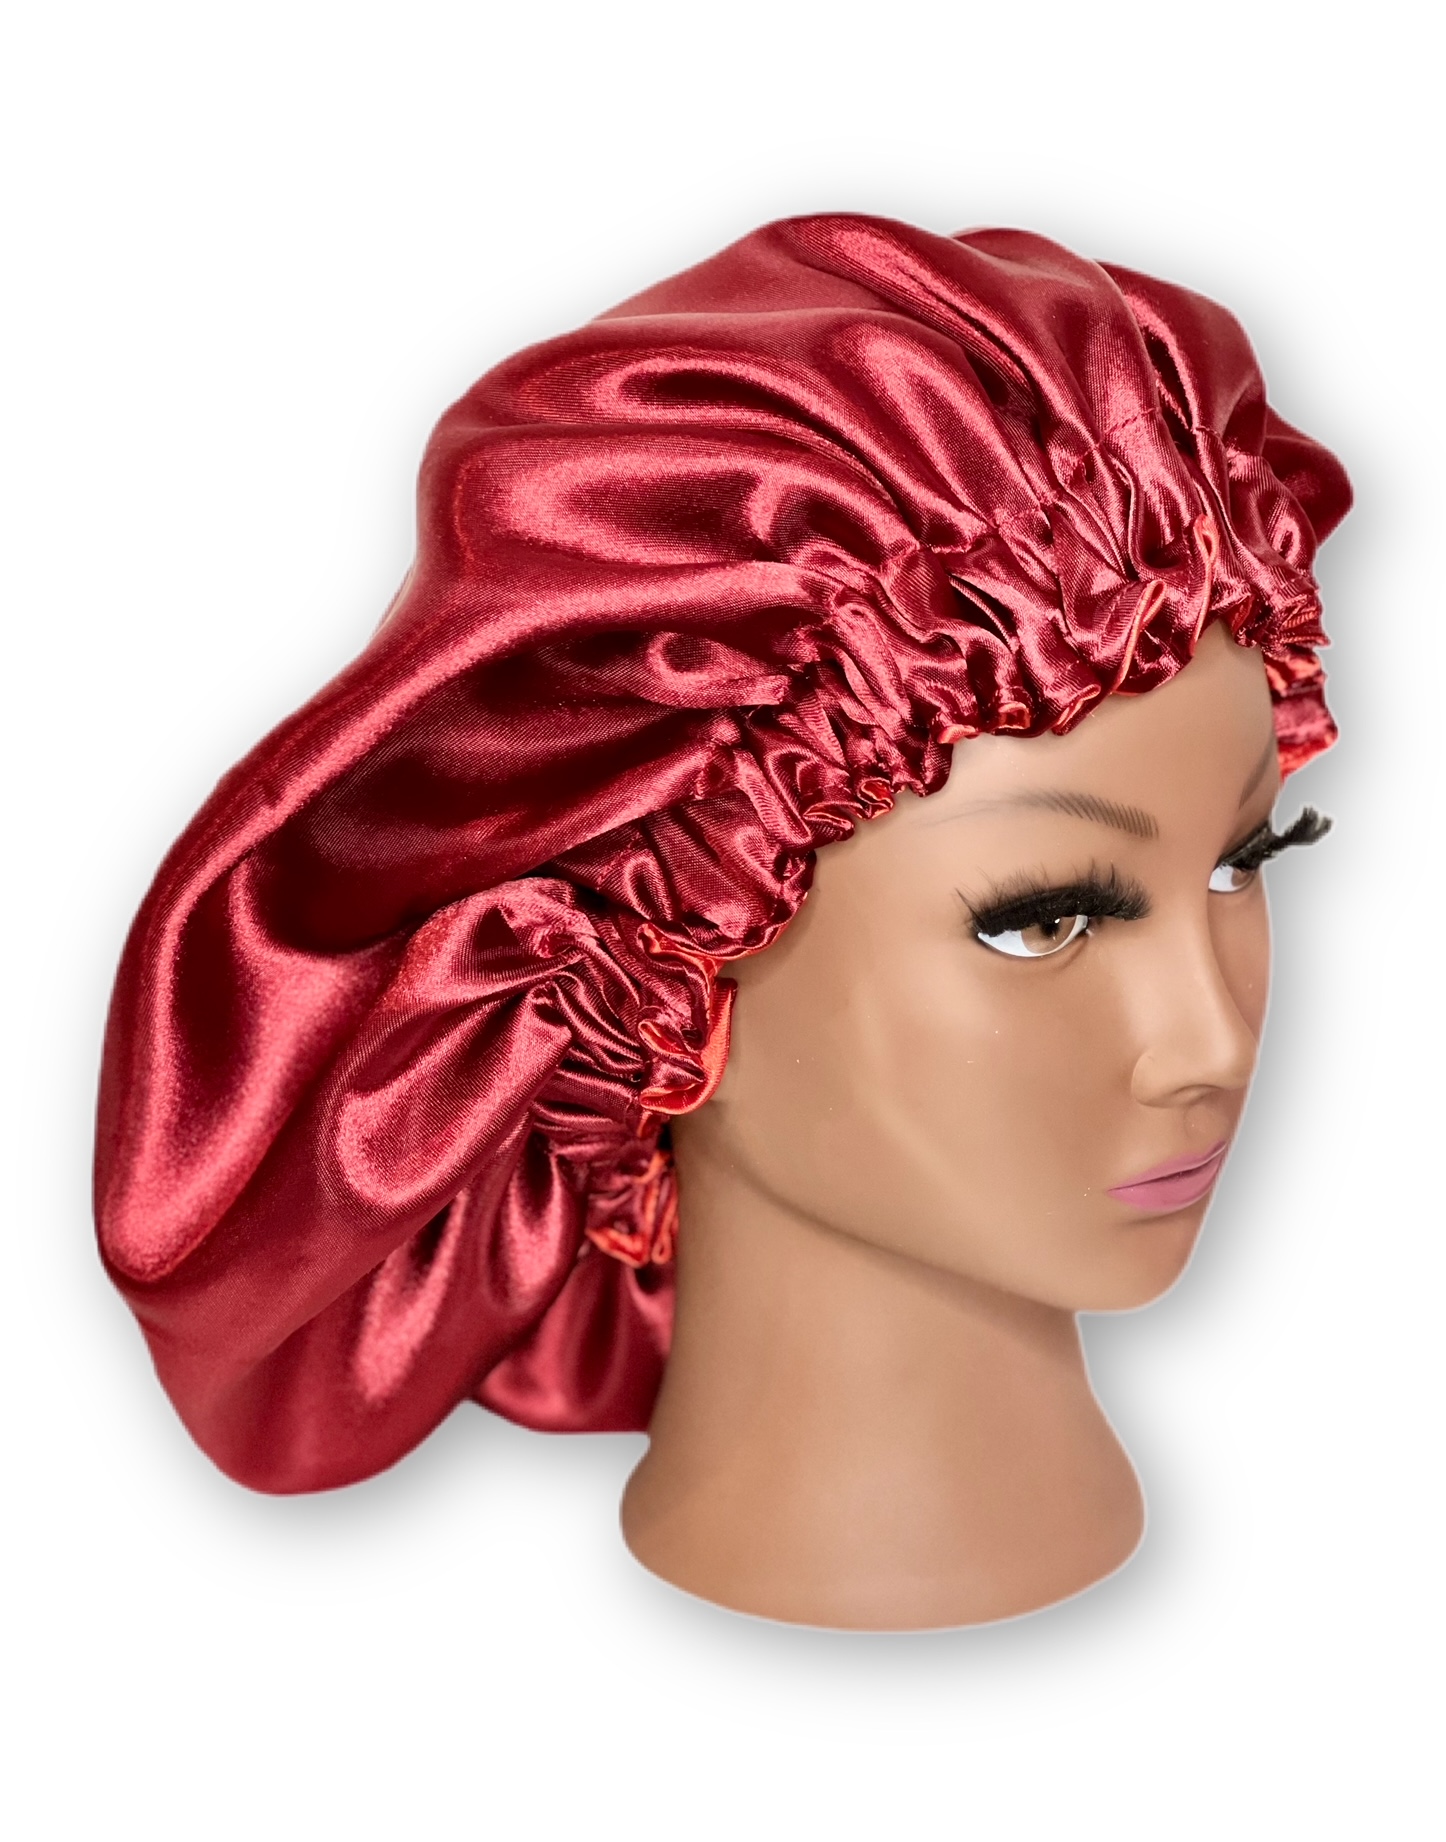 Reversible Satin Bonnet in the color Burgundy and size regular